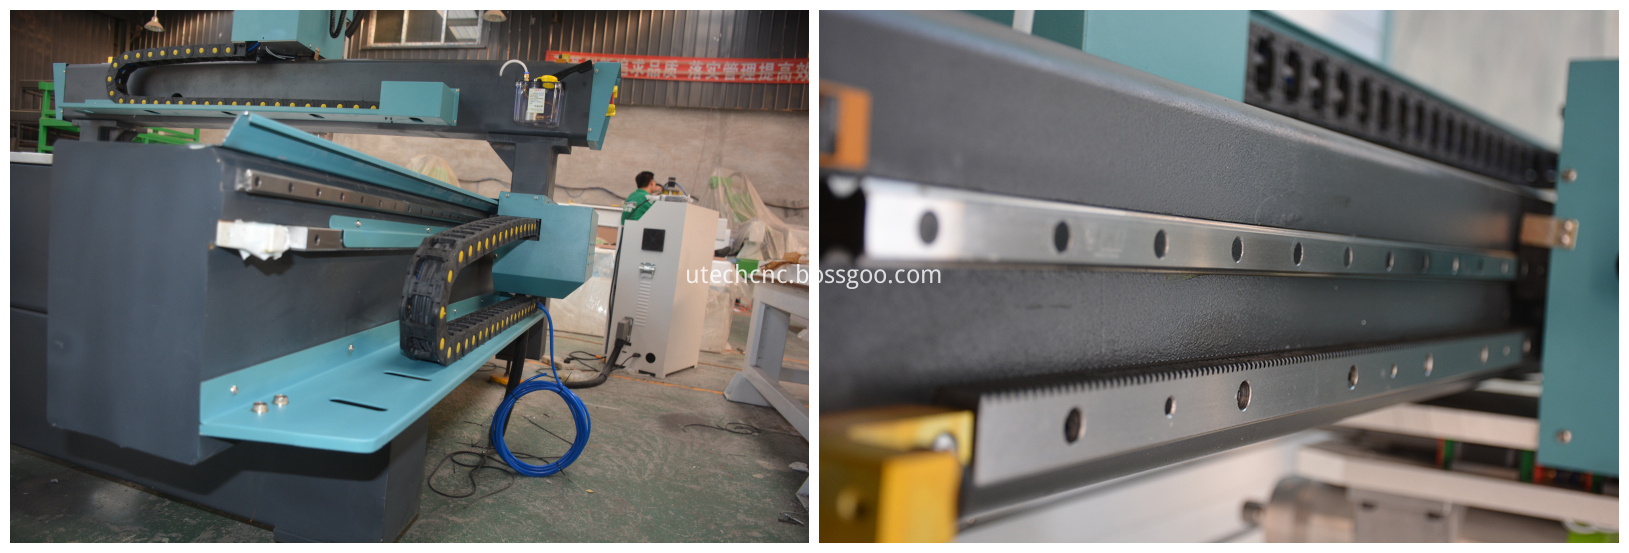 woodpecker cnc router